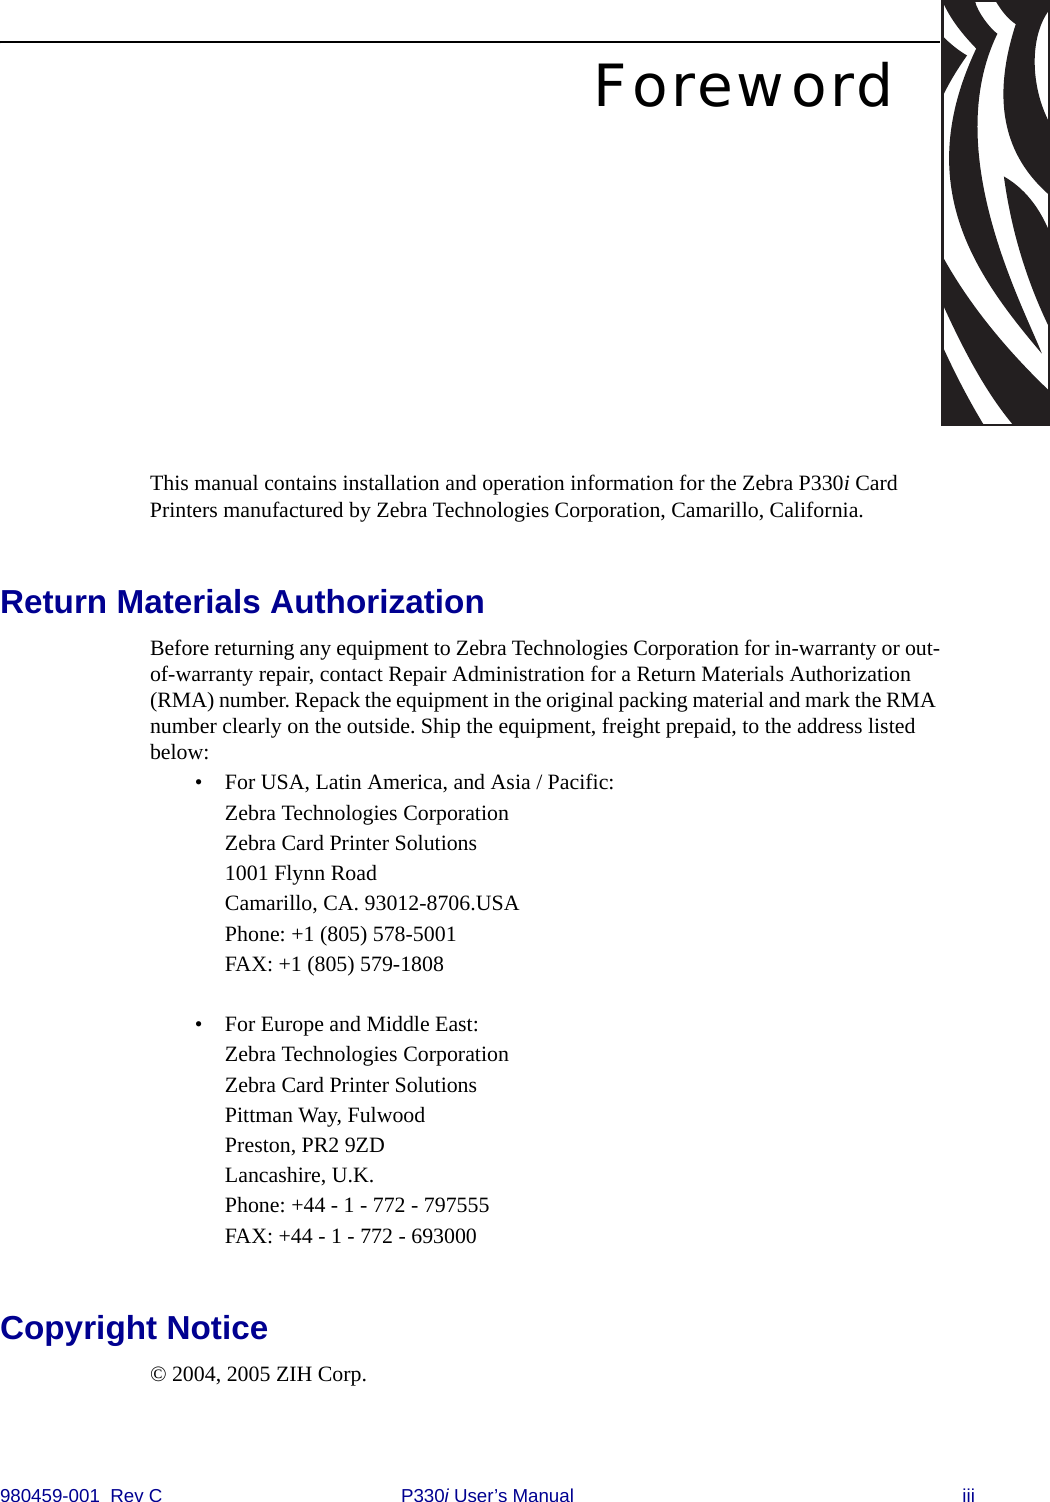 980459-001  Rev C P330i User’s Manual iiiForewordThis manual contains installation and operation information for the Zebra P330i Card Printers manufactured by Zebra Technologies Corporation, Camarillo, California.Return Materials AuthorizationBefore returning any equipment to Zebra Technologies Corporation for in-warranty or out-of-warranty repair, contact Repair Administration for a Return Materials Authorization (RMA) number. Repack the equipment in the original packing material and mark the RMA number clearly on the outside. Ship the equipment, freight prepaid, to the address listed below:• For USA, Latin America, and Asia / Pacific:Zebra Technologies CorporationZebra Card Printer Solutions1001 Flynn RoadCamarillo, CA. 93012-8706.USAPhone: +1 (805) 578-5001FAX: +1 (805) 579-1808• For Europe and Middle East:Zebra Technologies CorporationZebra Card Printer SolutionsPittman Way, FulwoodPreston, PR2 9ZDLancashire, U.K.Phone: +44 - 1 - 772 - 797555FAX: +44 - 1 - 772 - 693000Copyright Notice© 2004, 2005 ZIH Corp.